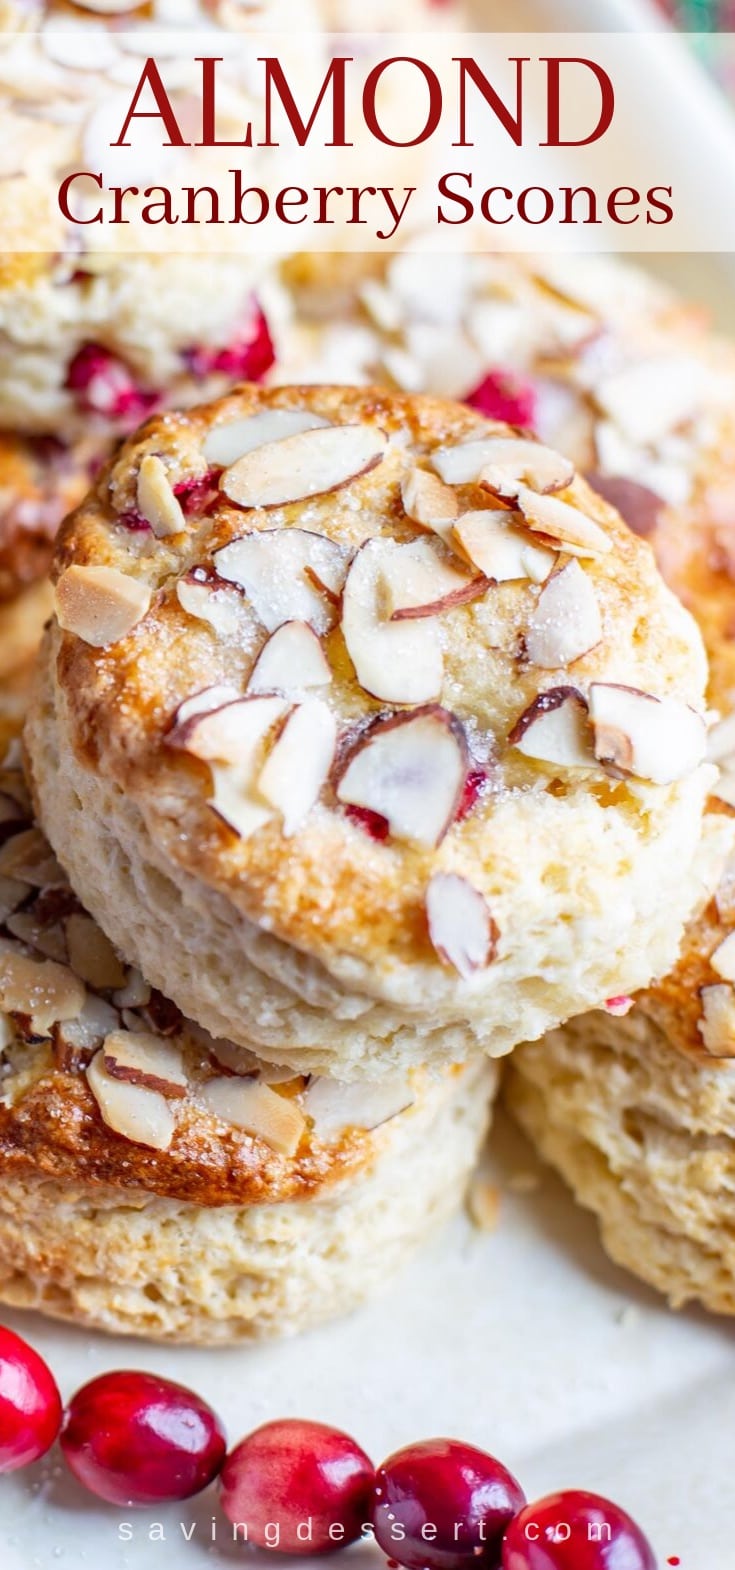 A close up of an almond cranberry scone topped with sliced almonds and coarse sugar